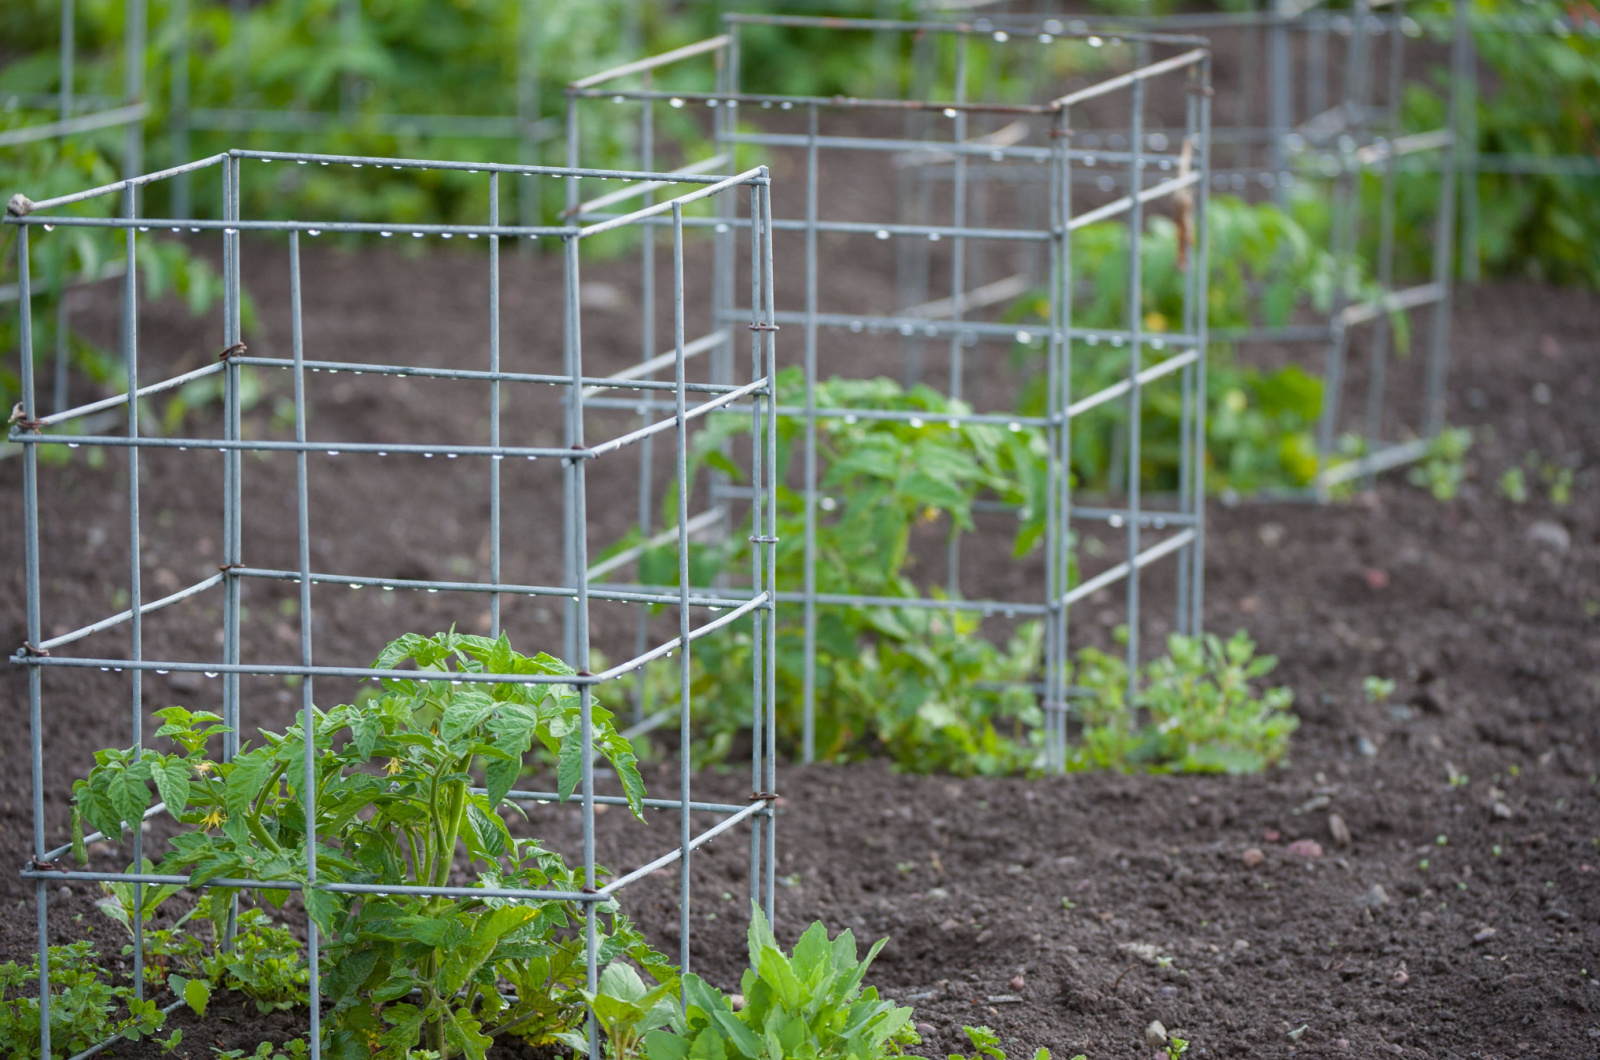 Crops in cage